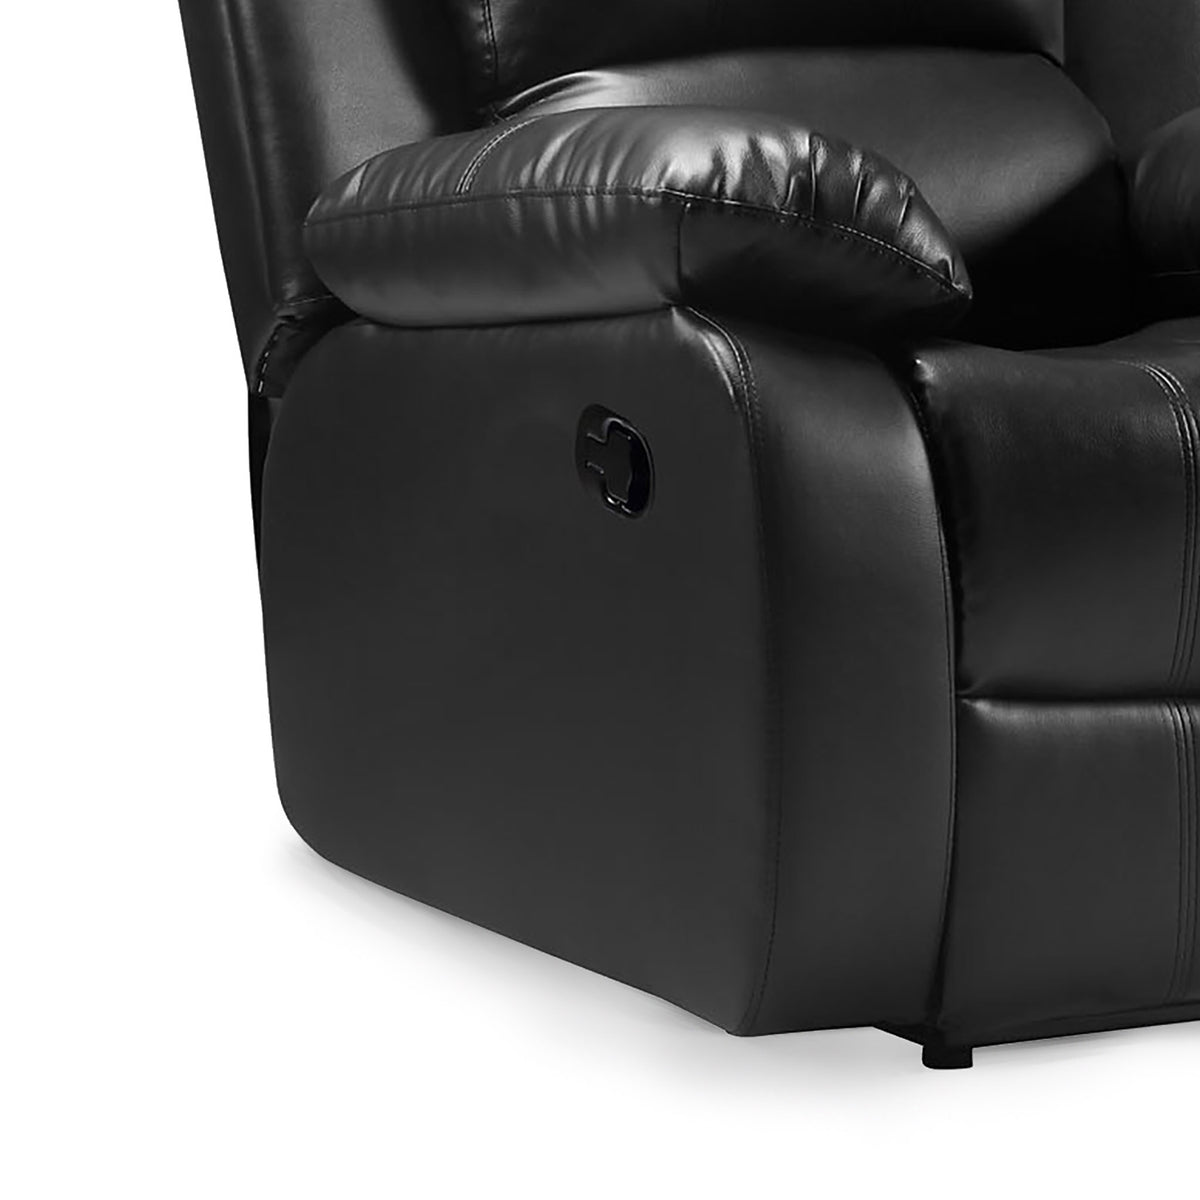 Valencia Black Reclining Air Leather Armchair - Close up of side of chair